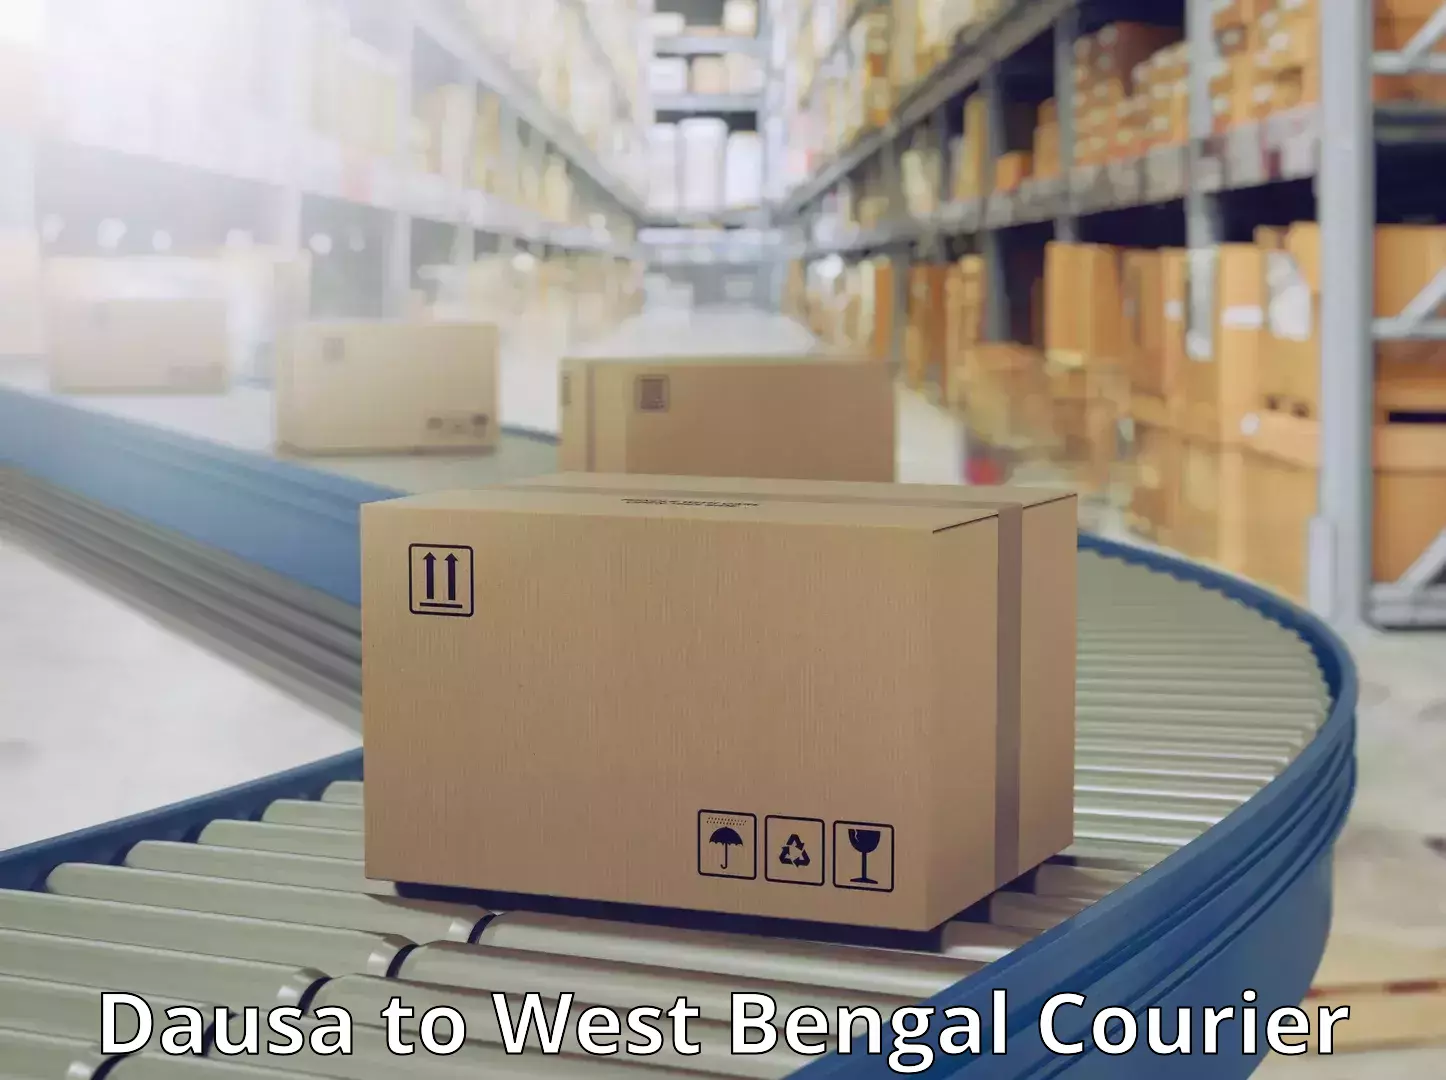 Express delivery capabilities Dausa to West Bengal